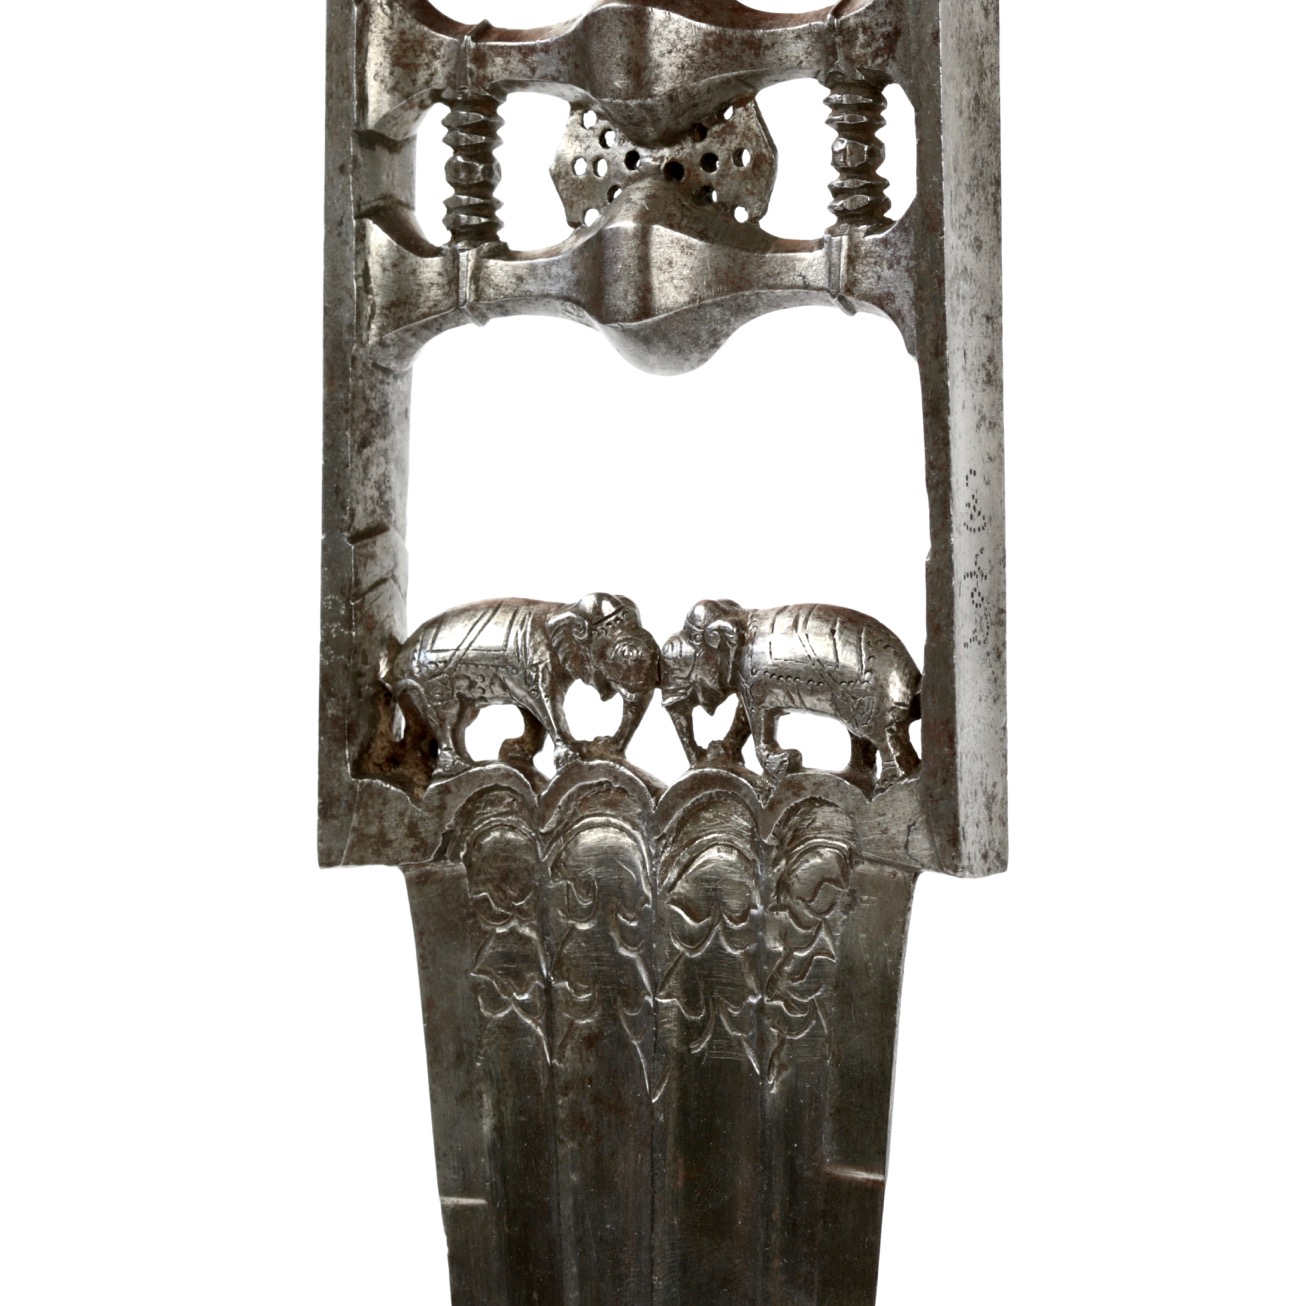 An all-steel katar with chiseled elephants and Bikaner armory marks